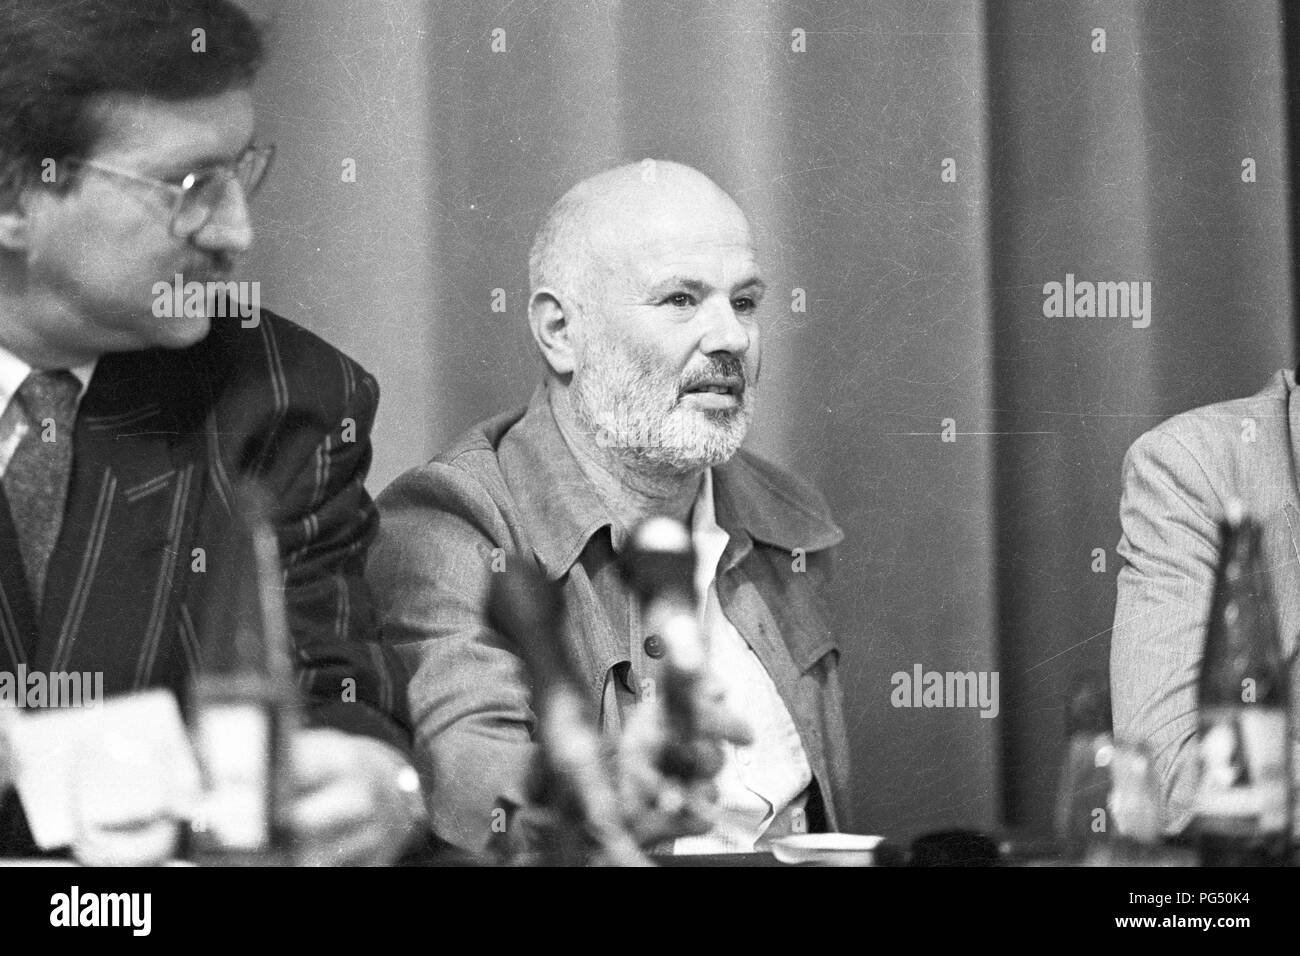 The Hungarian writer Istvan Eorsi gives a press conference at a meeting of the Oesterreichische Gesellschaft fuer Literatur (Austrian Literature Society) in Vienna in 1990. Stock Photo